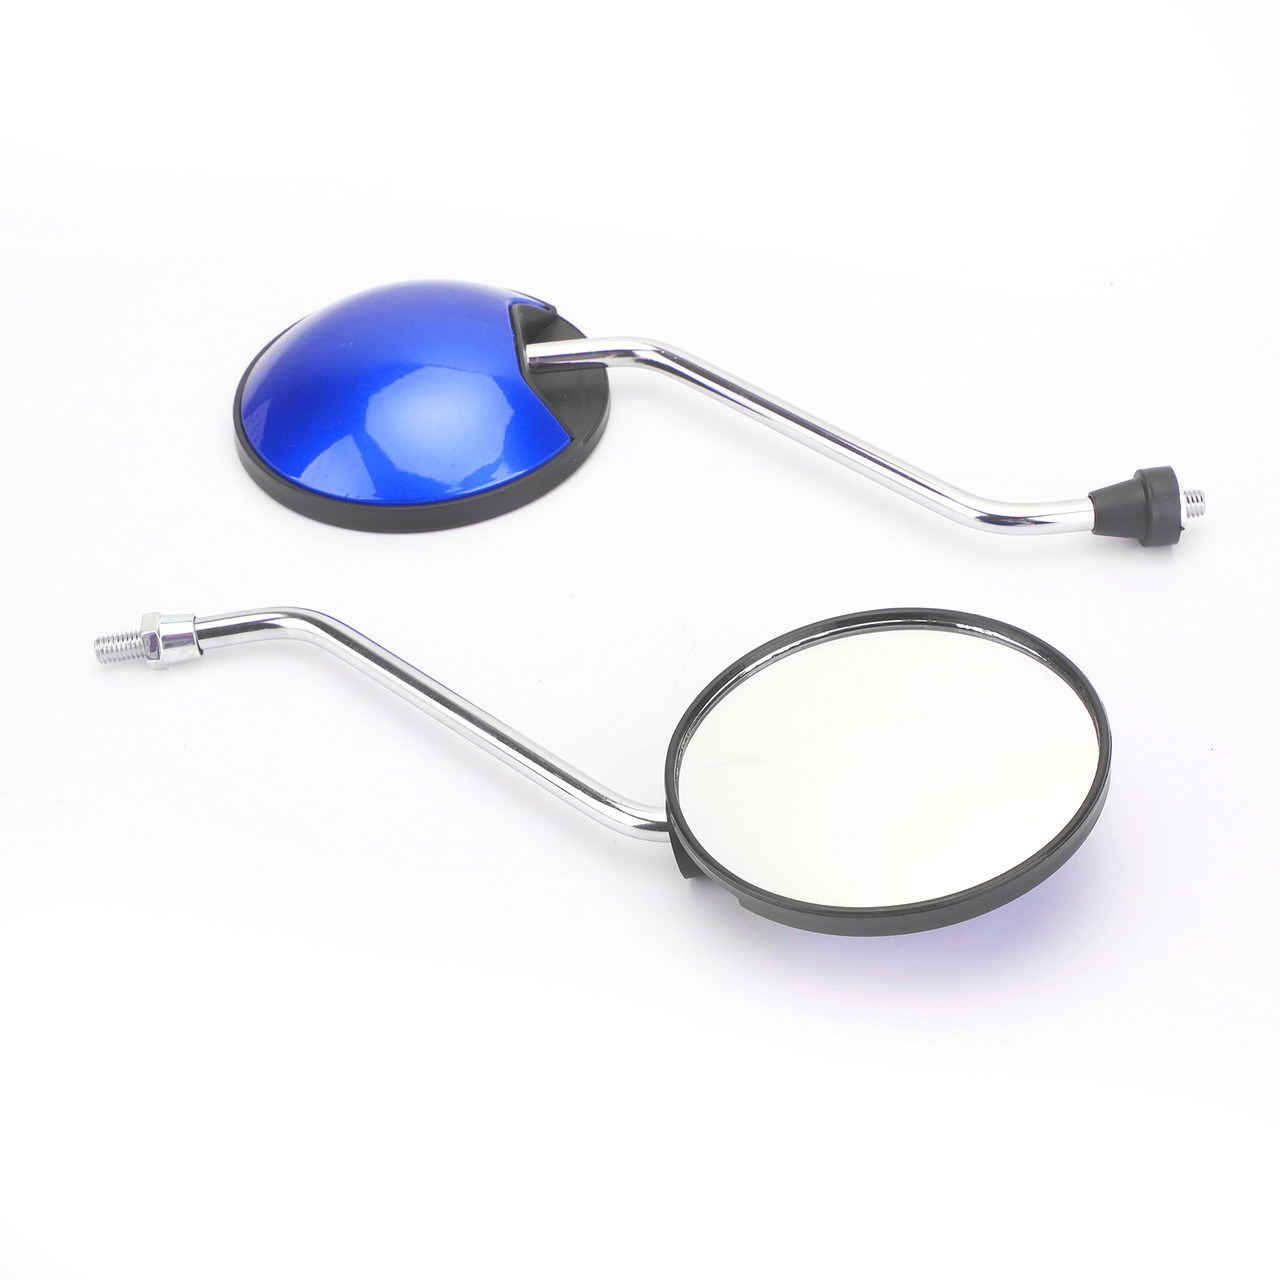 Pair 8mm Rearview Mirrors fits for Honda Scooter Motorcycle Moped Bike ATV with 8MM threads Blue~BC2